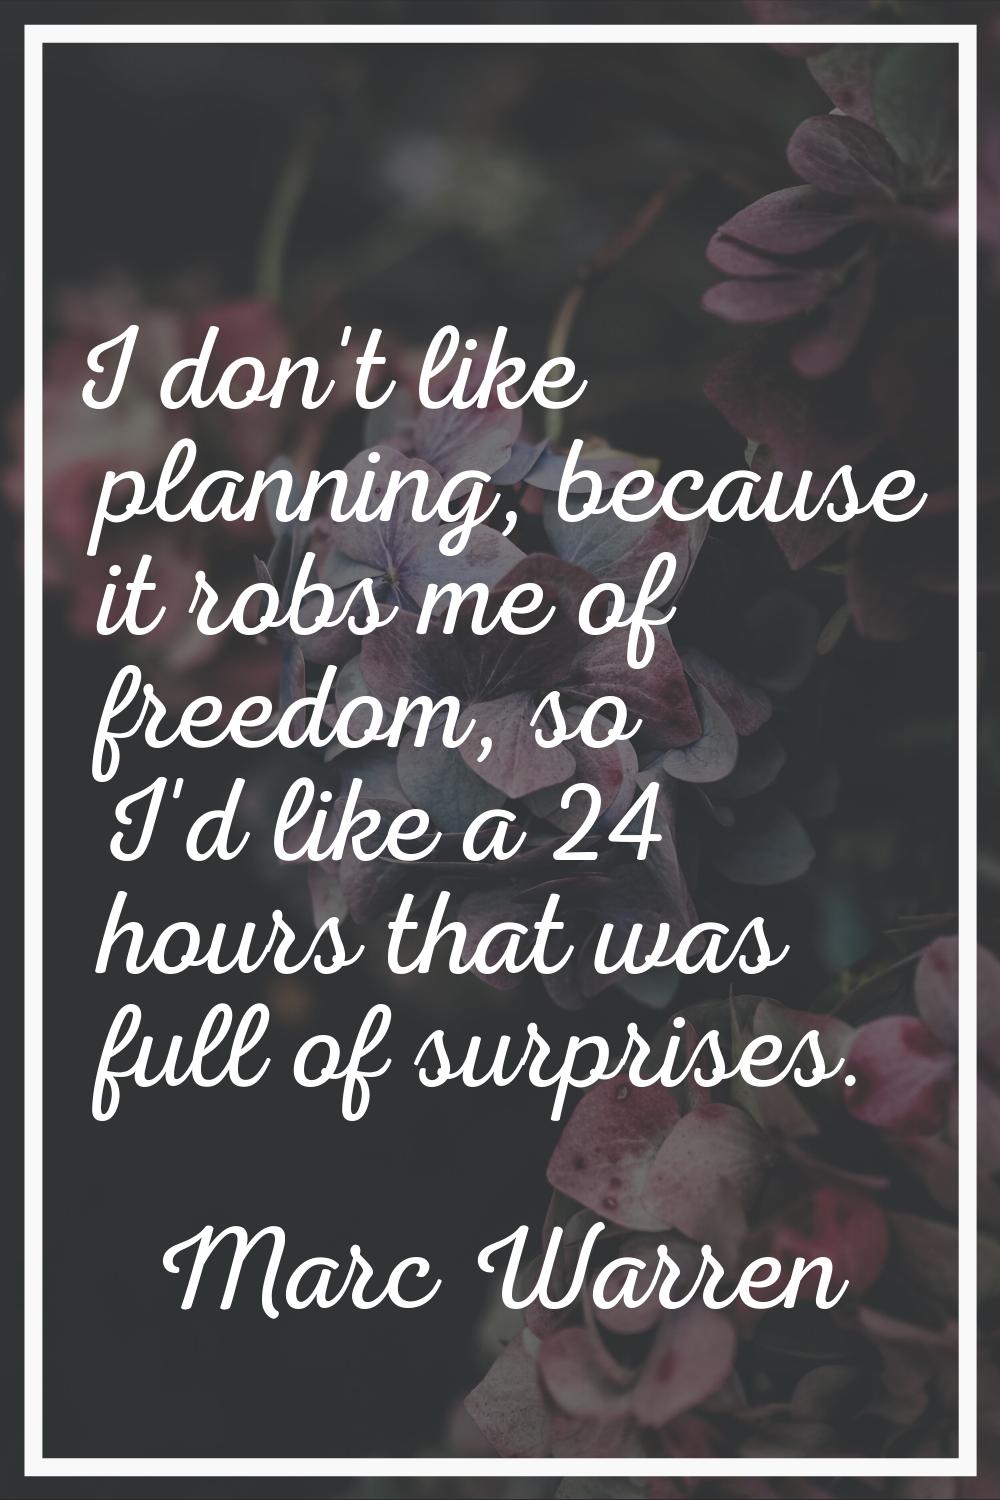 I don't like planning, because it robs me of freedom, so I'd like a 24 hours that was full of surpr